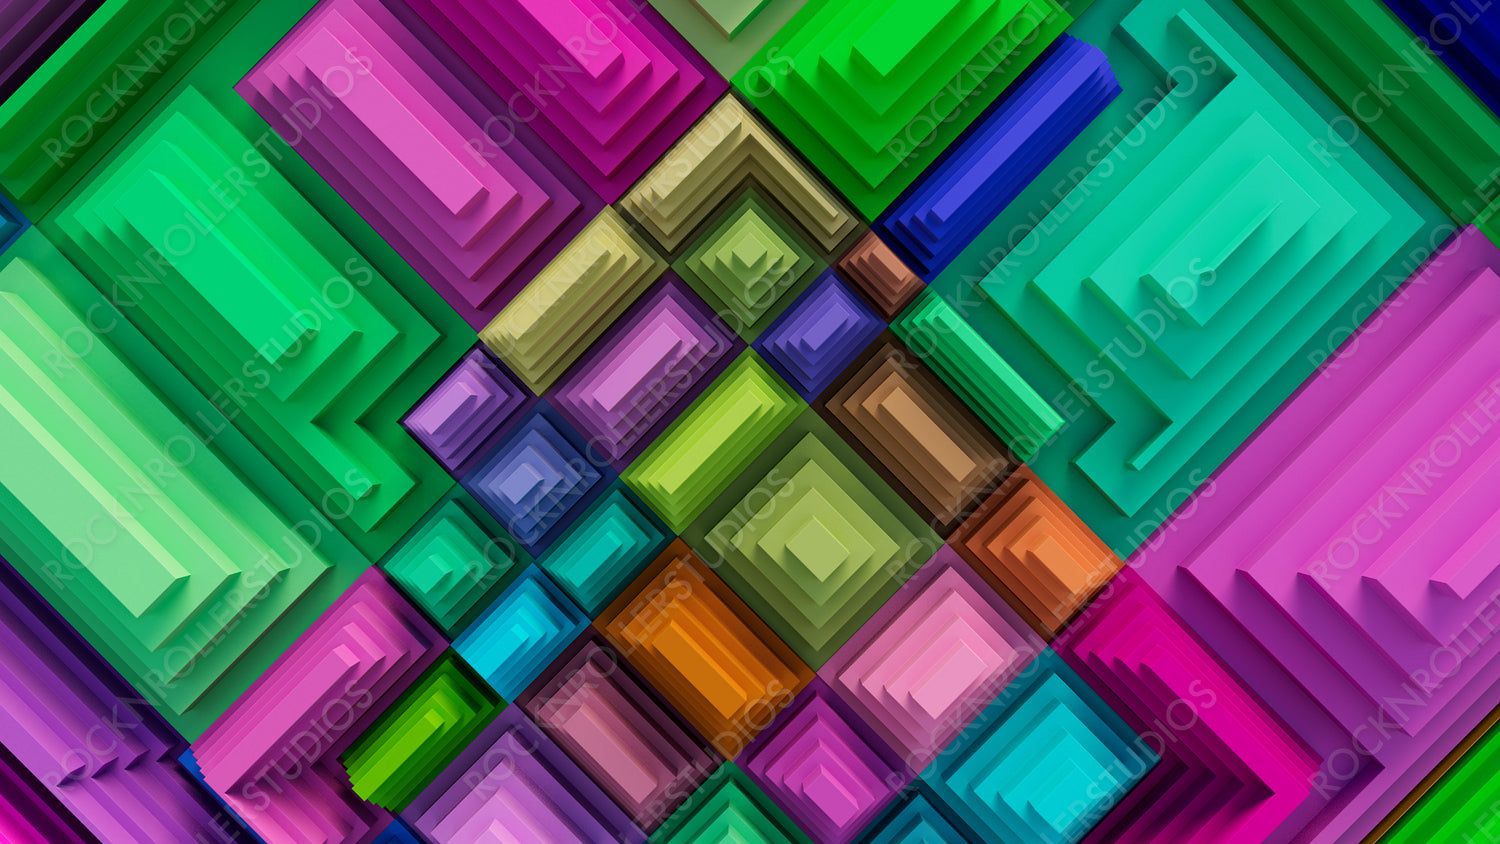 Multicolored, Tech Background with a Geometric 3D Structure. Bright, Stepped design with Extruded Futuristic Forms. 3D Render.